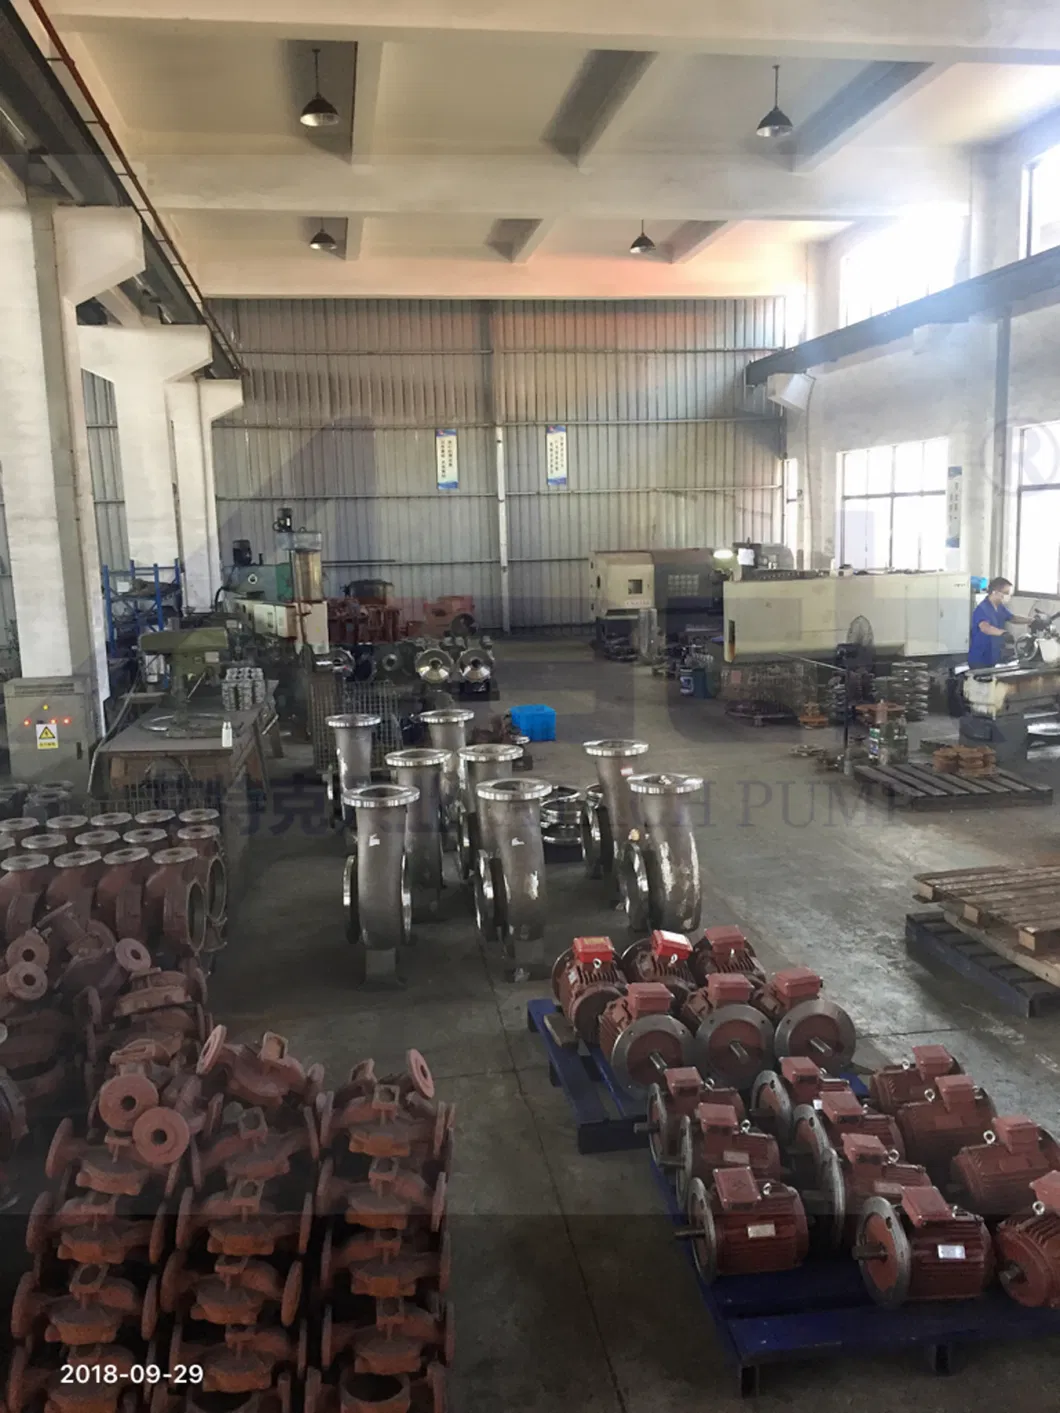 Ih Ground Industrial Lifting Pump 3 Phase Chemical Pump Can Transport Viscosity Similar to Water Class Substances, Nitric Acid/Sulfuric Acid, etc